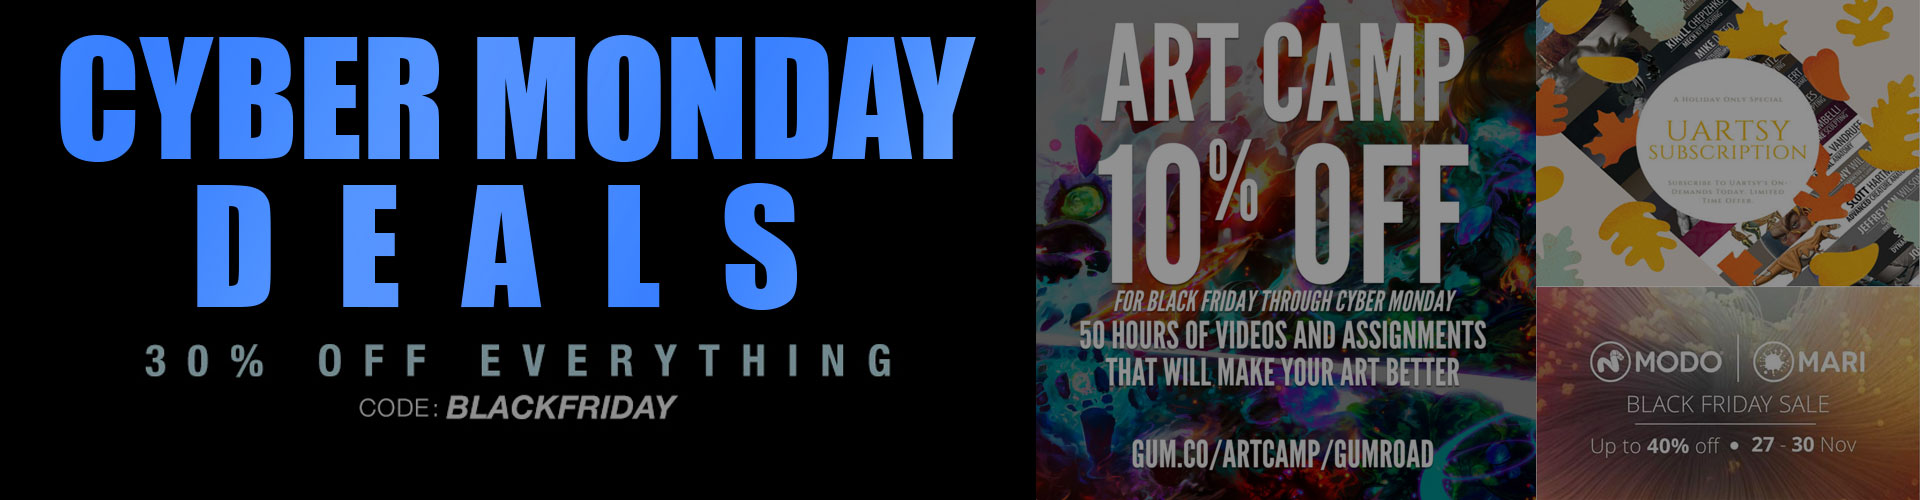 10 Fantastic Cyber Monday Deals for Digital Artists in 2015